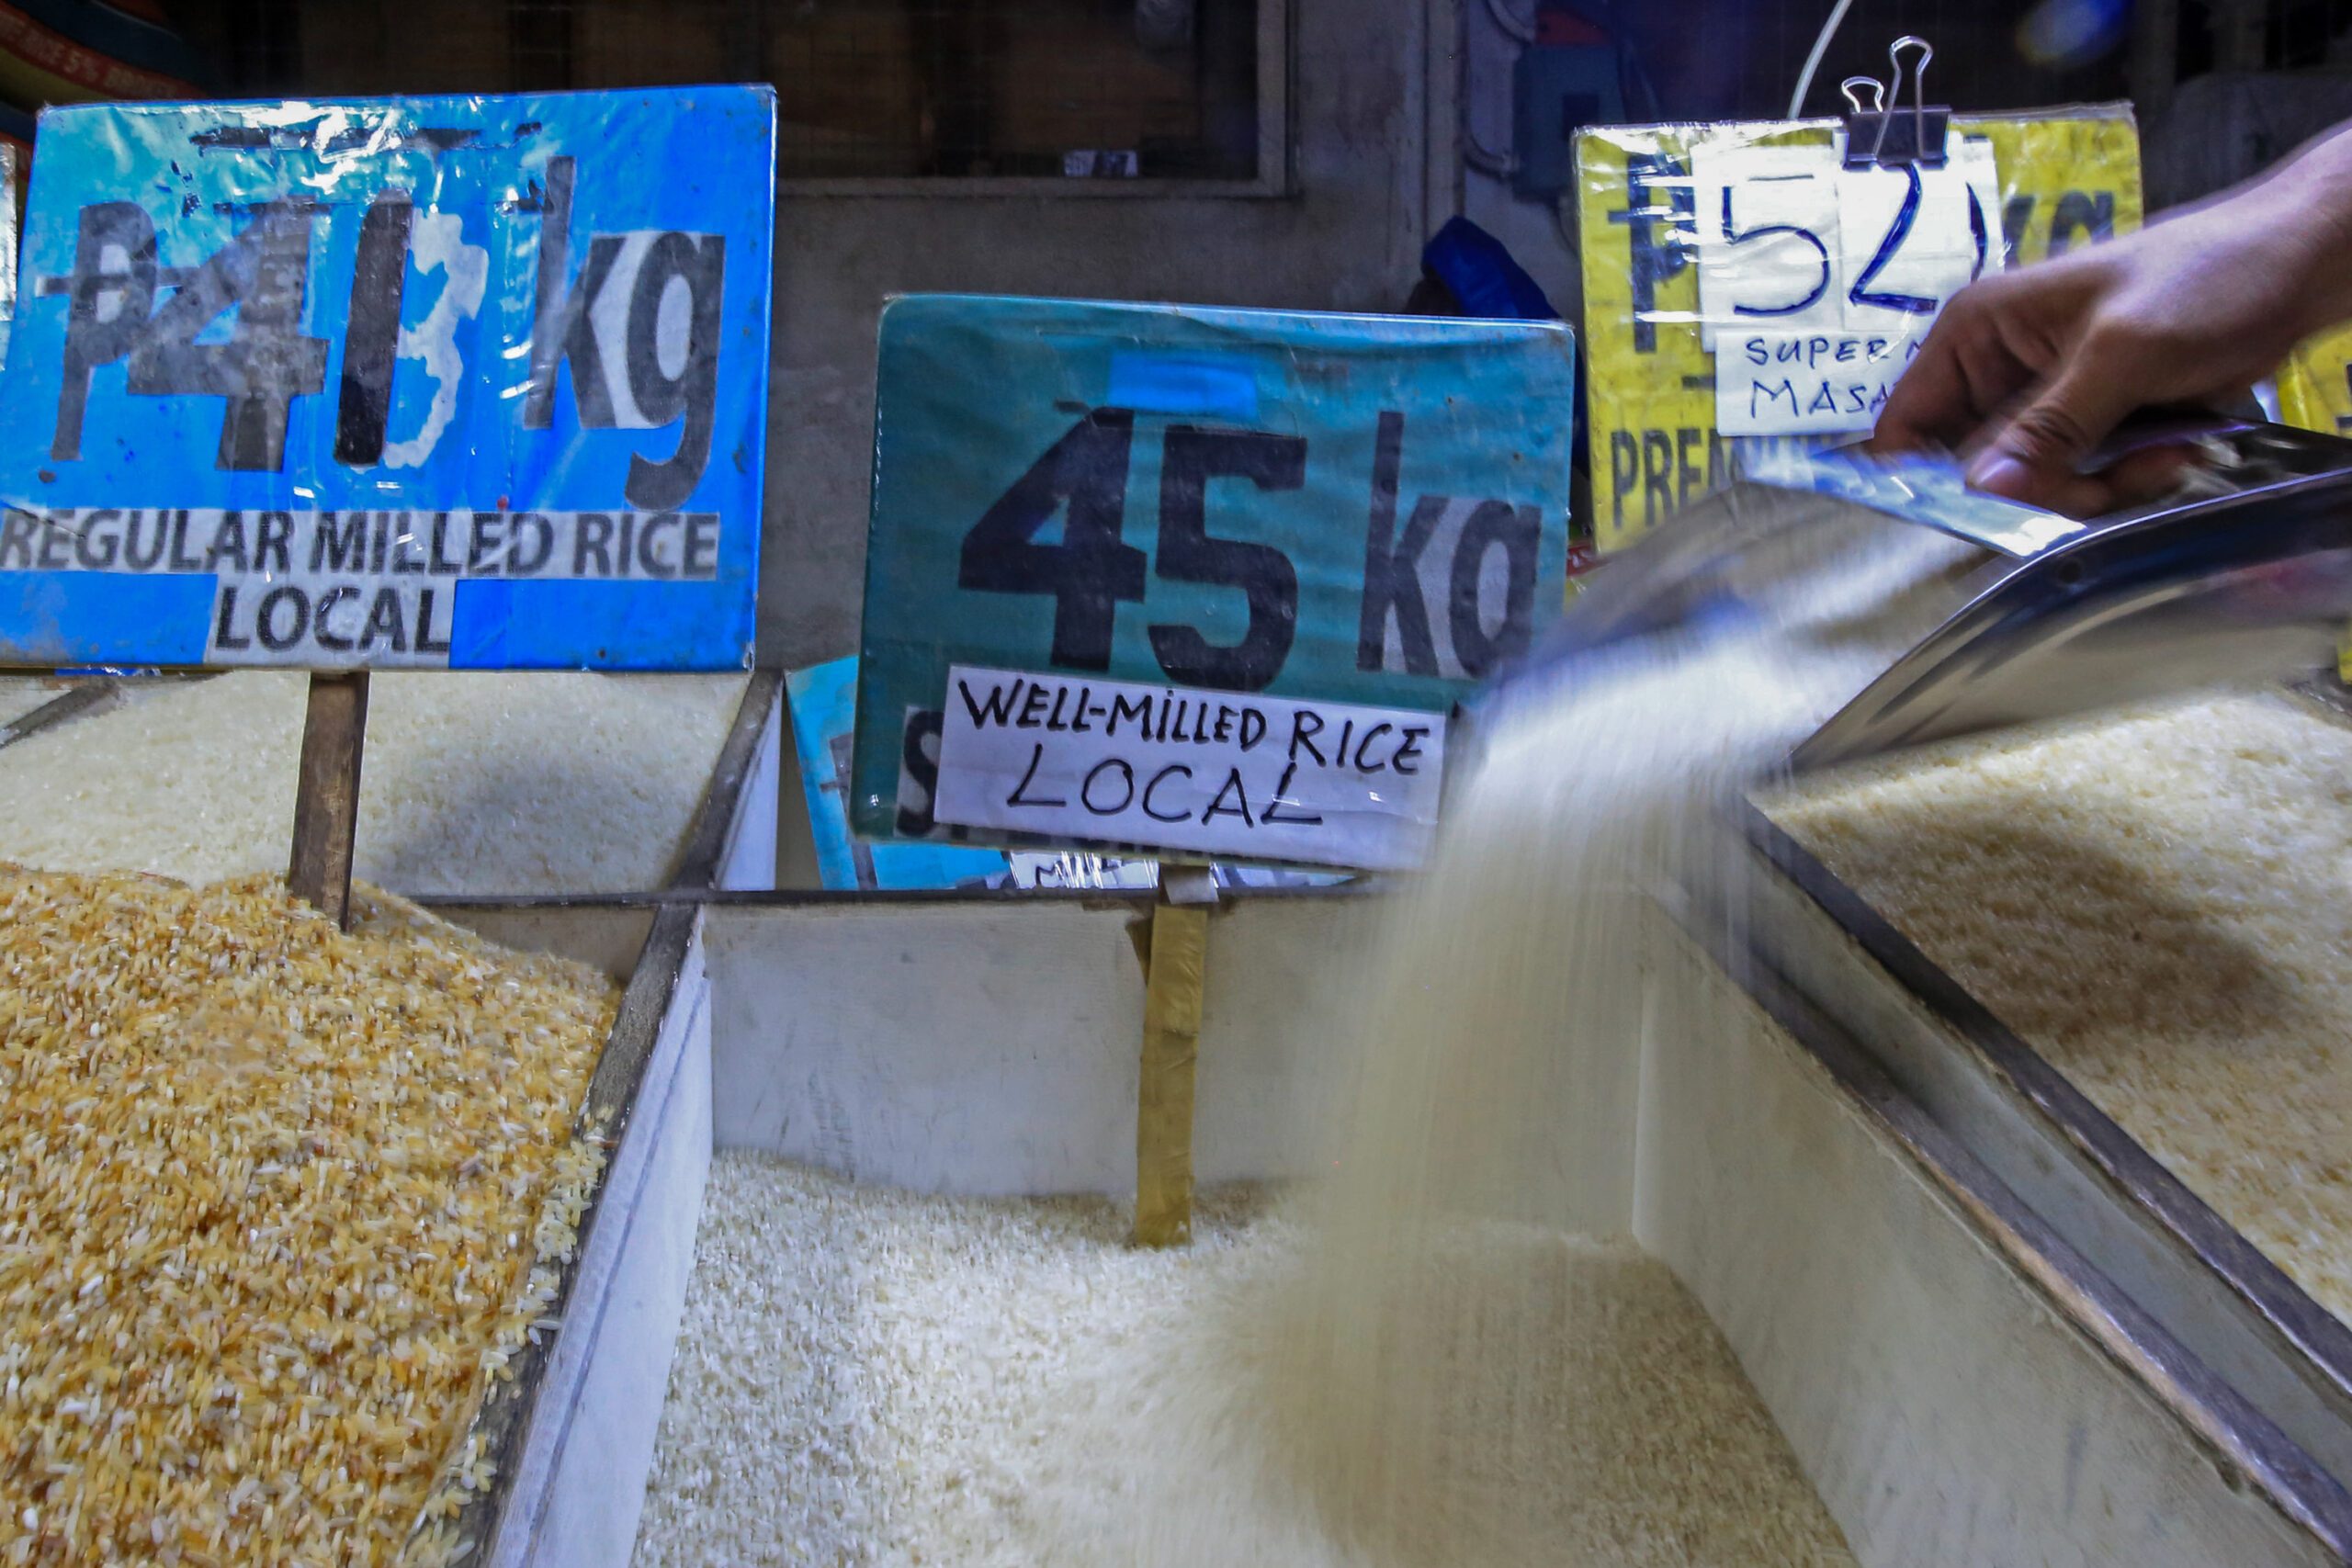 More rice retailers to receive P15,000 cash aid as price caps hurt businesses